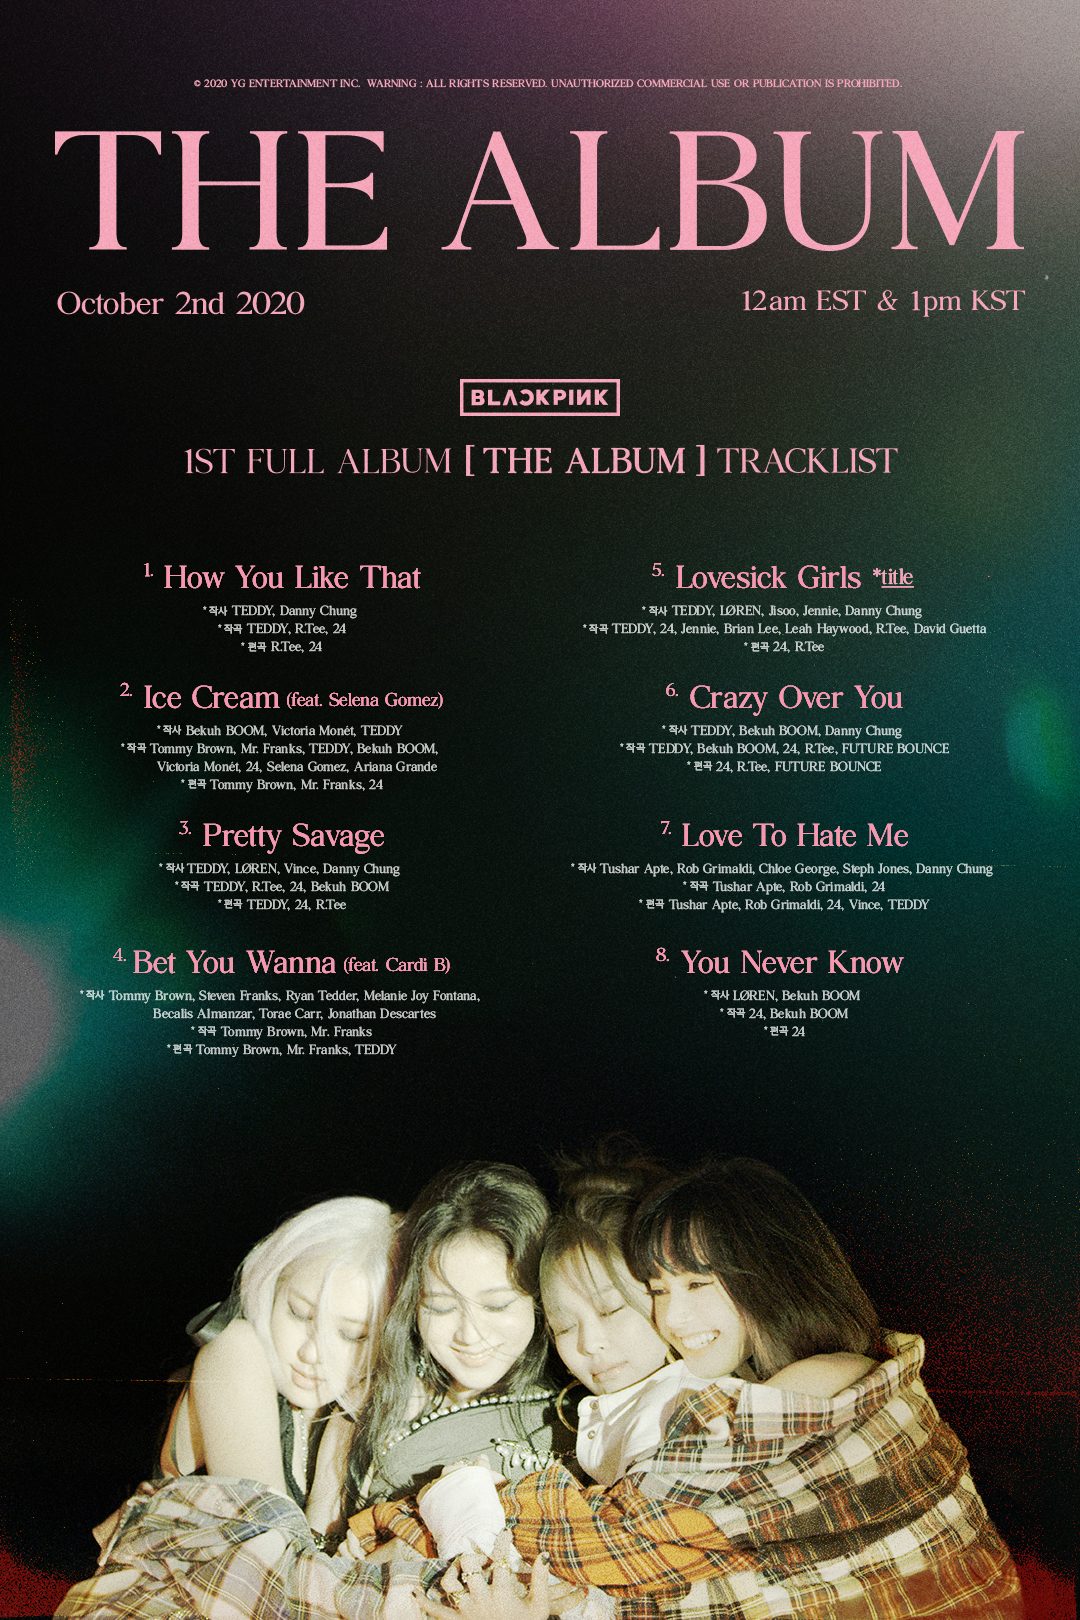 BLACKPINK releases track list for ‘The Album’